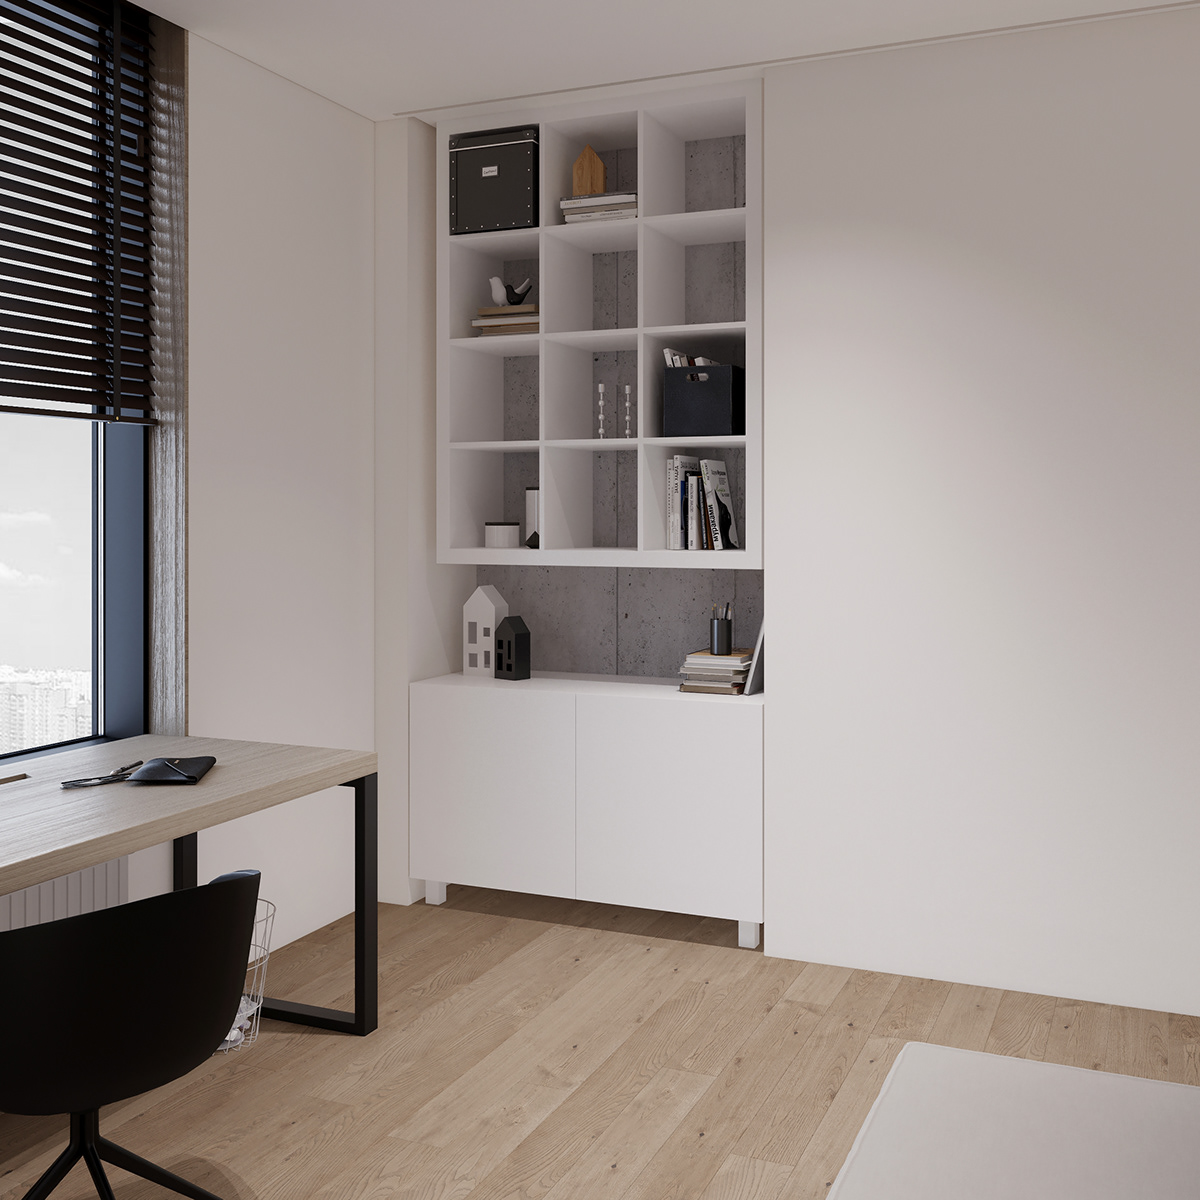 The bookshelf's pure white color and modern design contribute to the workspace's professional and neat appearance.